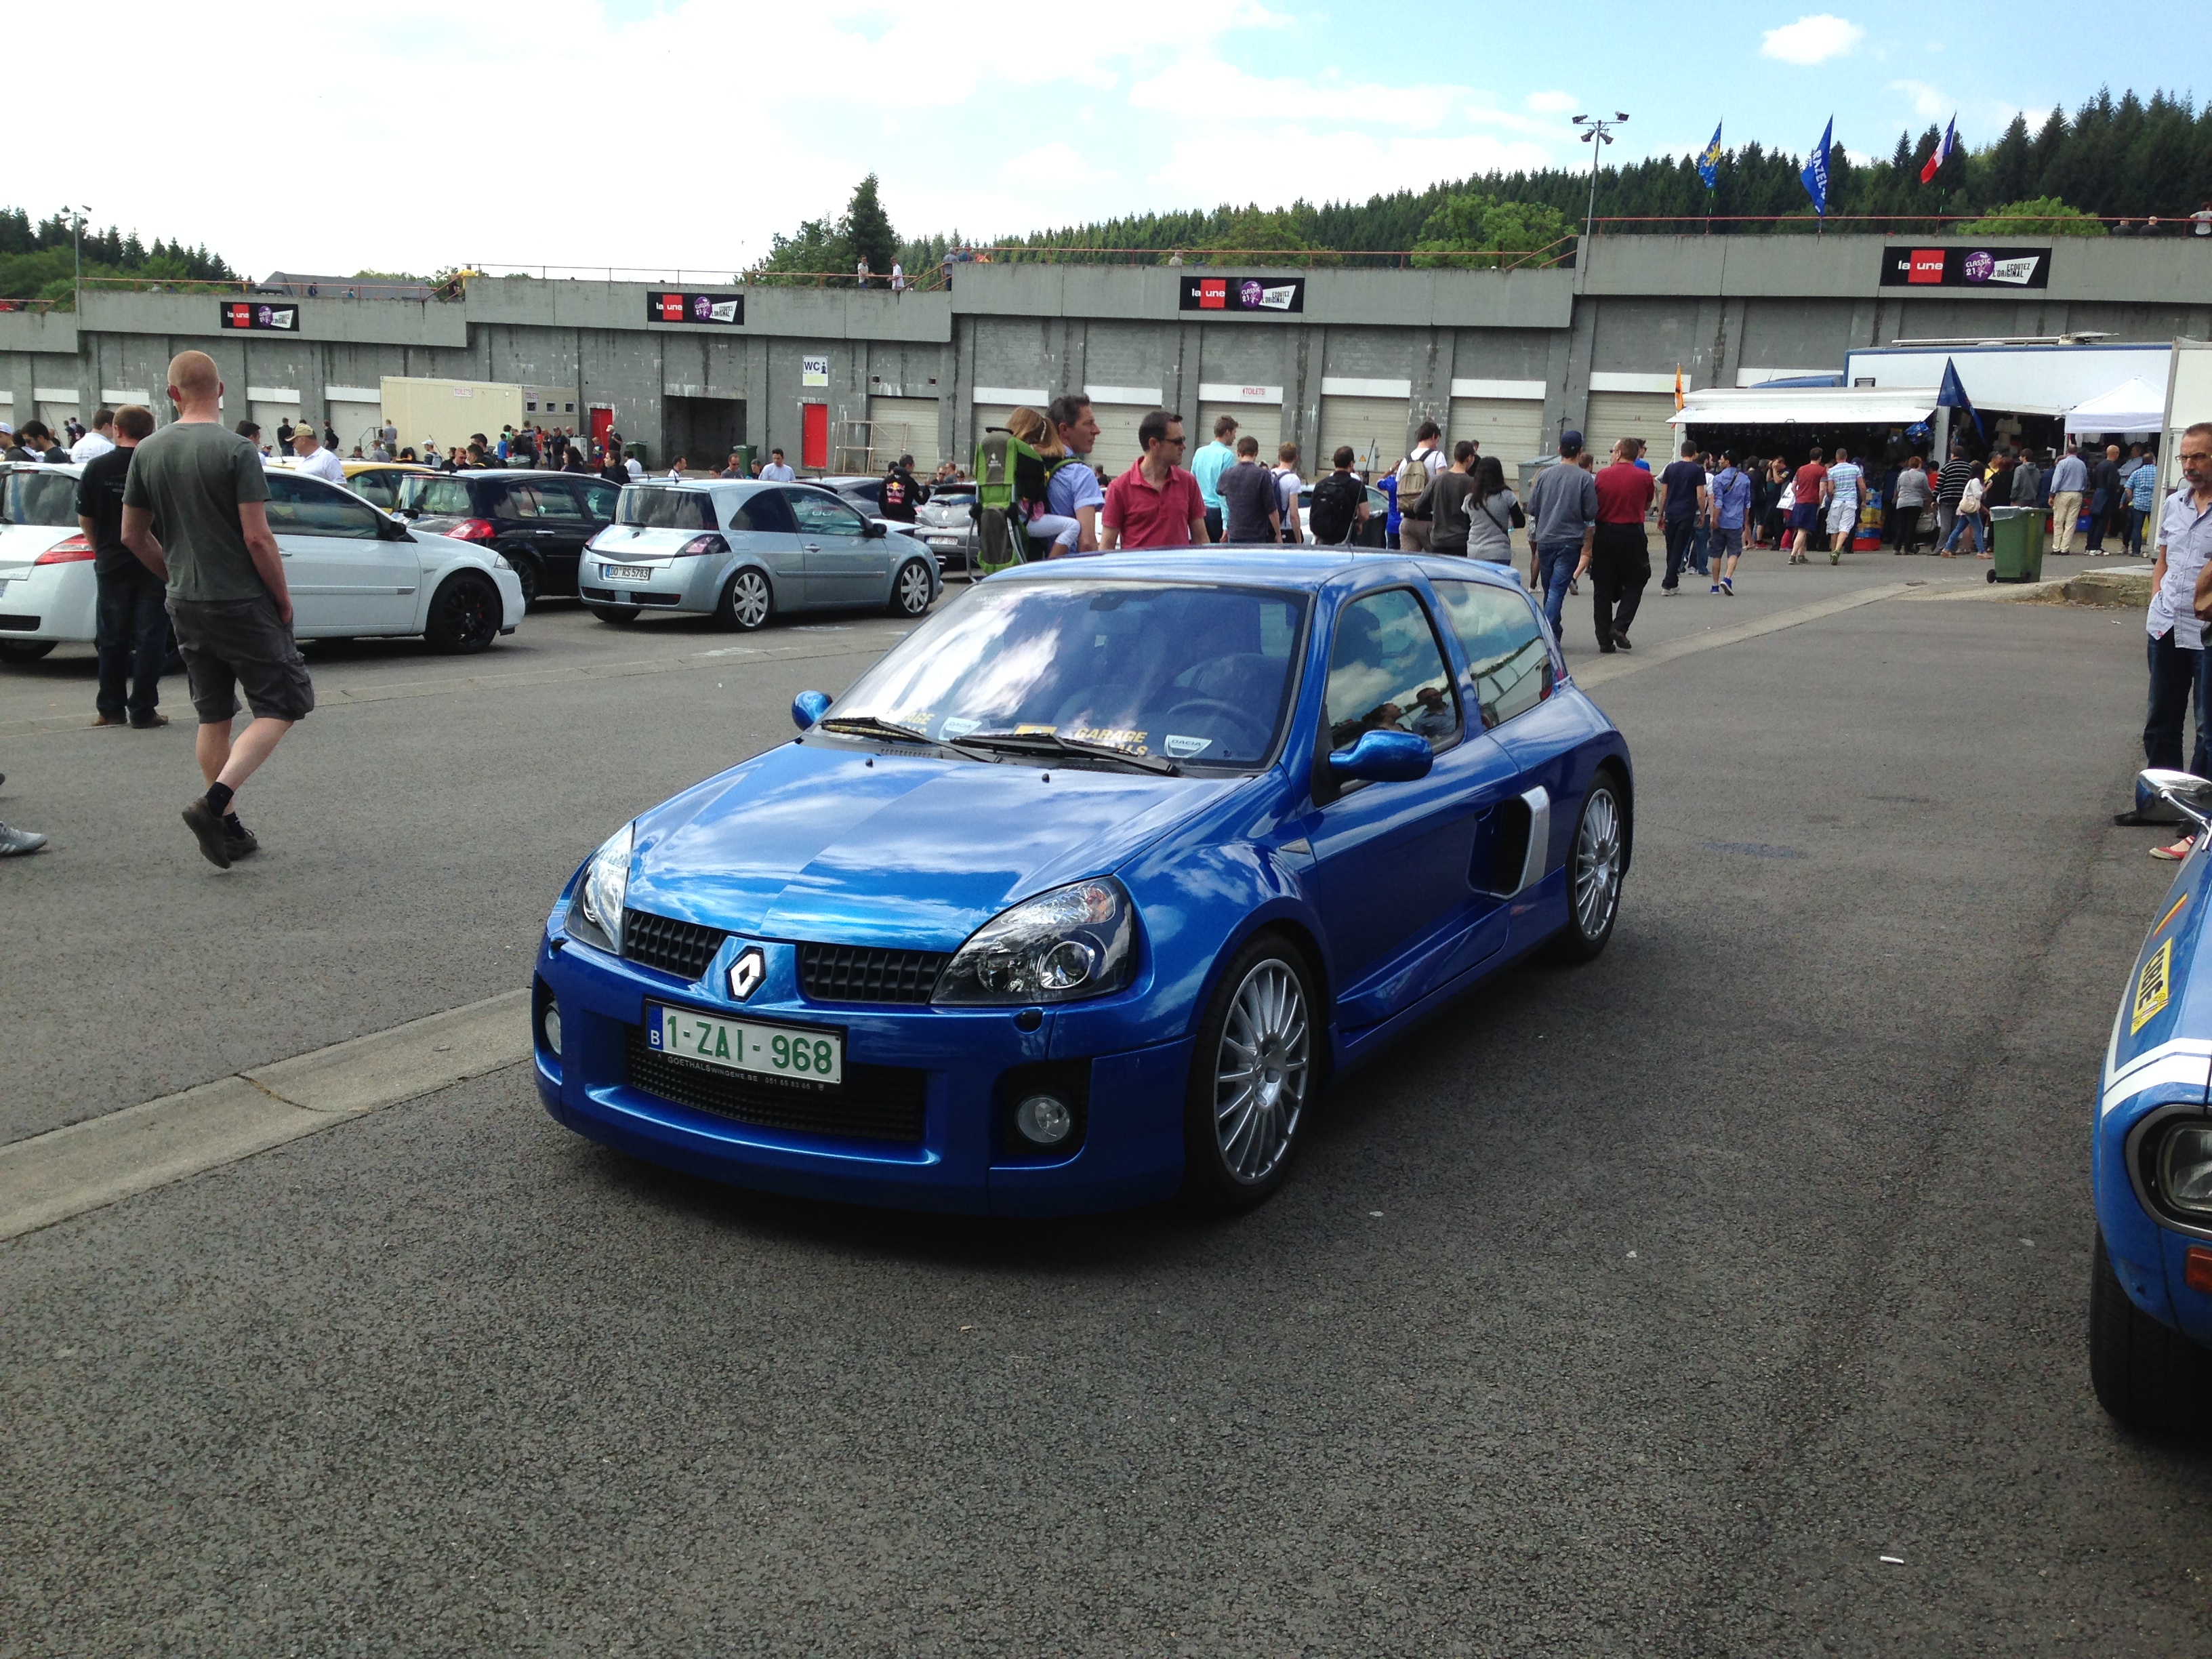 world serie by renault Spa le 30.31.1 juin 2014 14060110193017380112281613